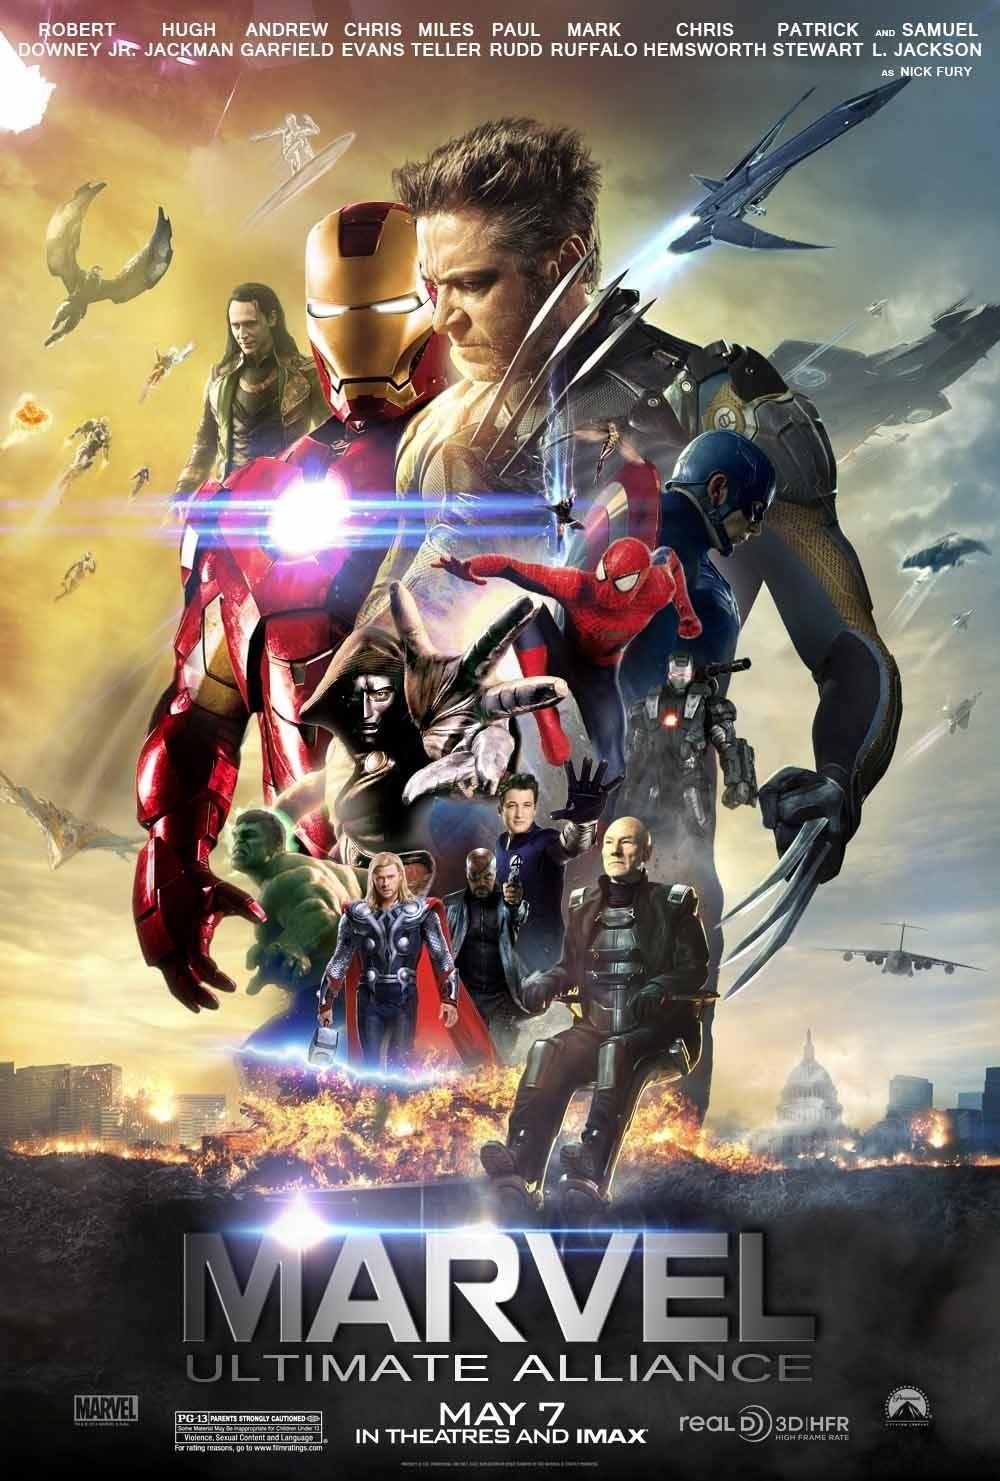 Marvel Ultimate Alliance Poster (Fan Made)*sniff sniff* It's